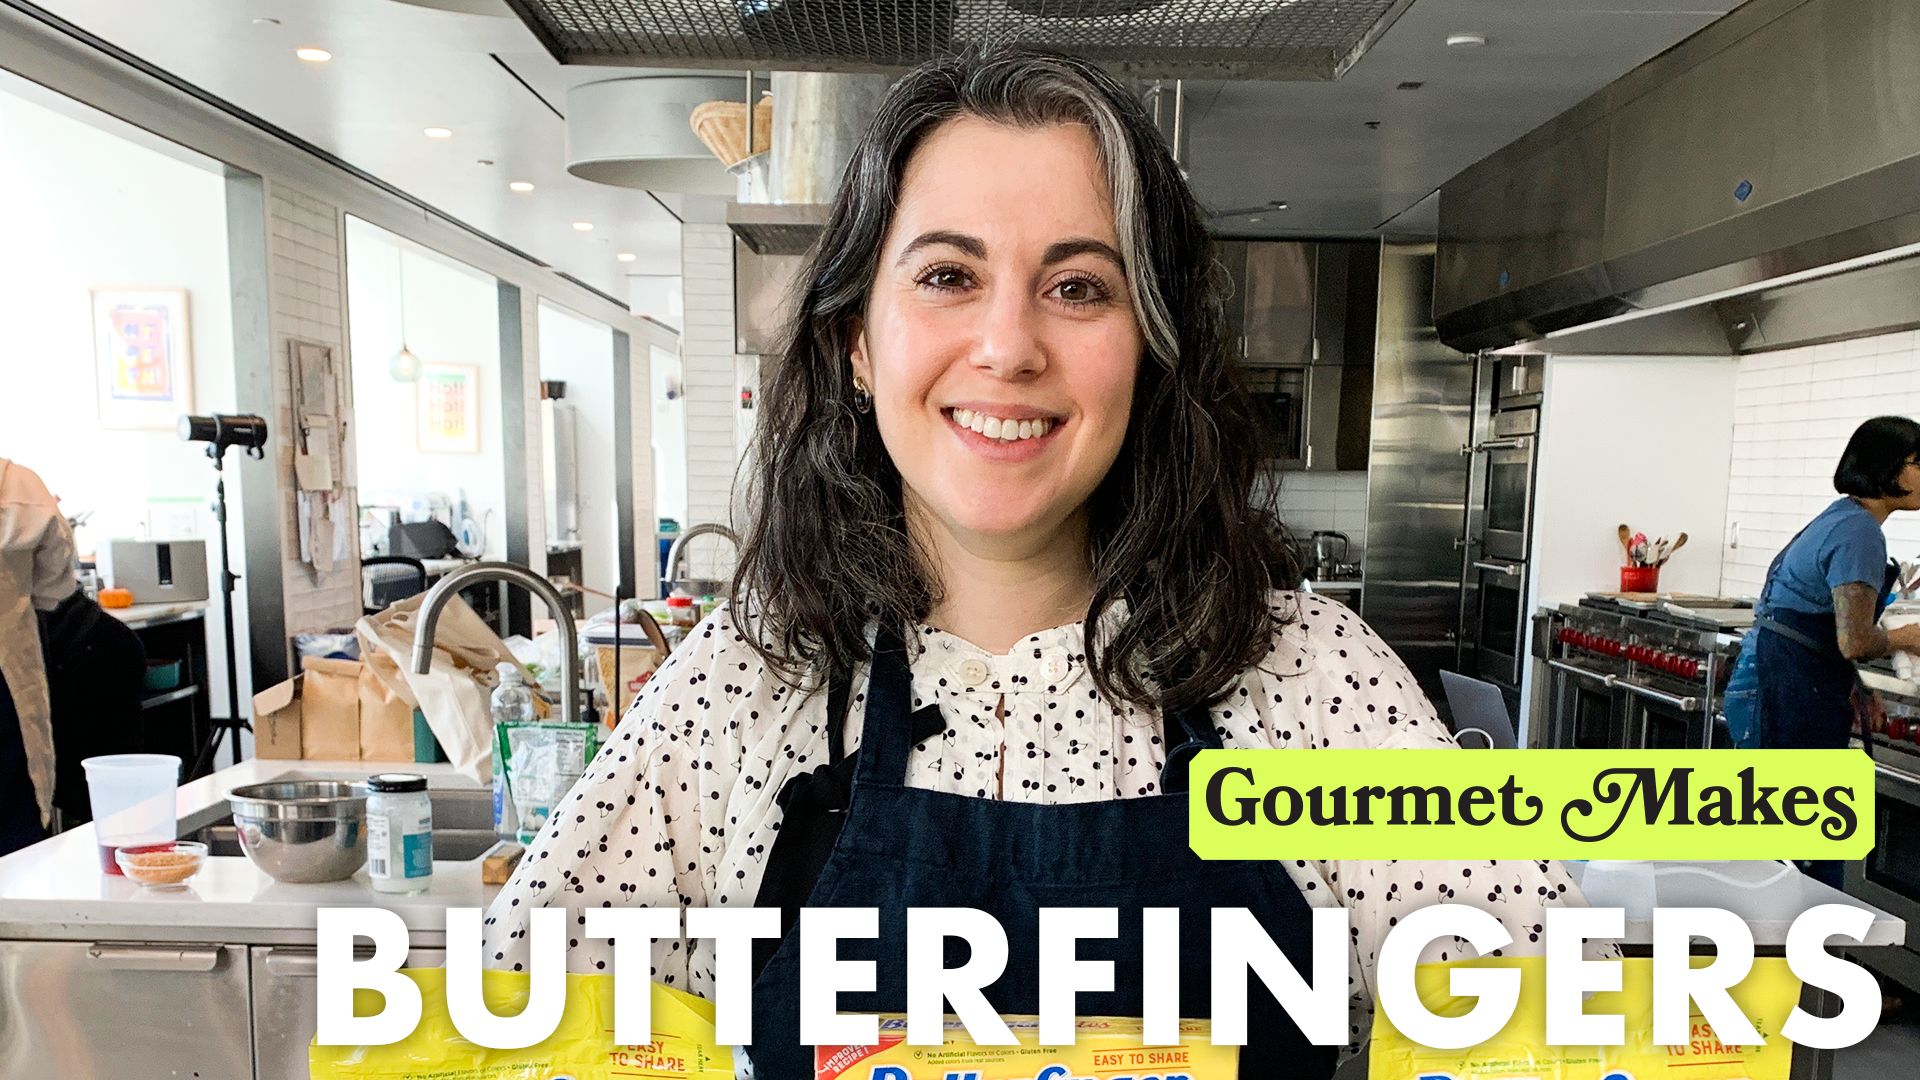 Watch Pastry Chef Attempts to Make Gourmet Butterfingers